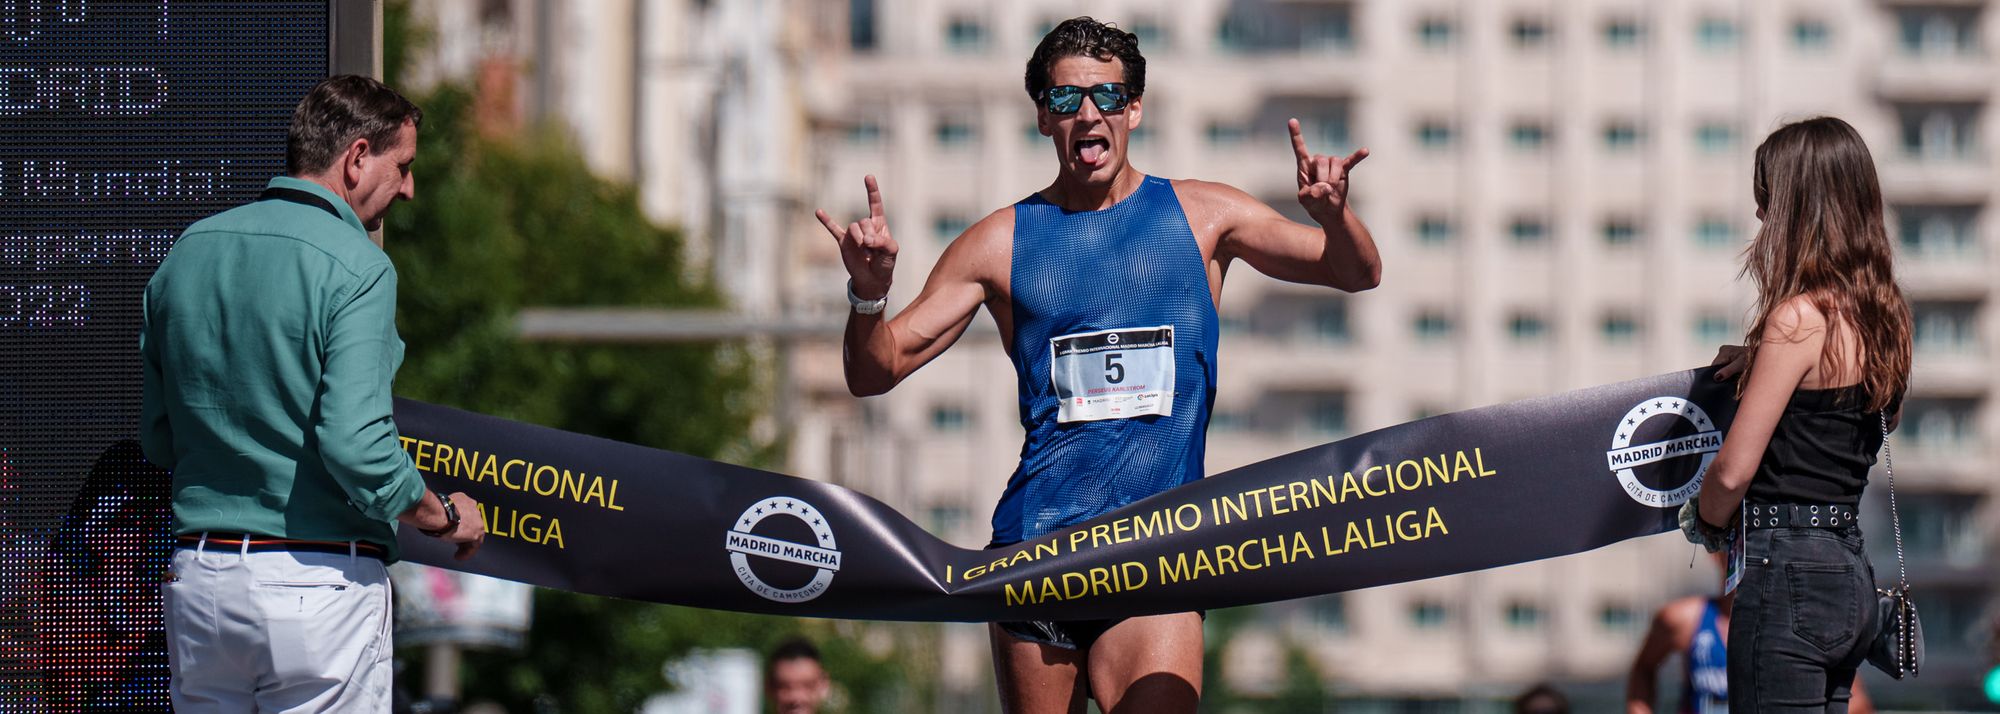 After a successful first edition held last year, some of the world’s finest race walkers will clash when the second Gran Premio Internacional Finetwork Madrid Marcha takes place in the Spanish capital